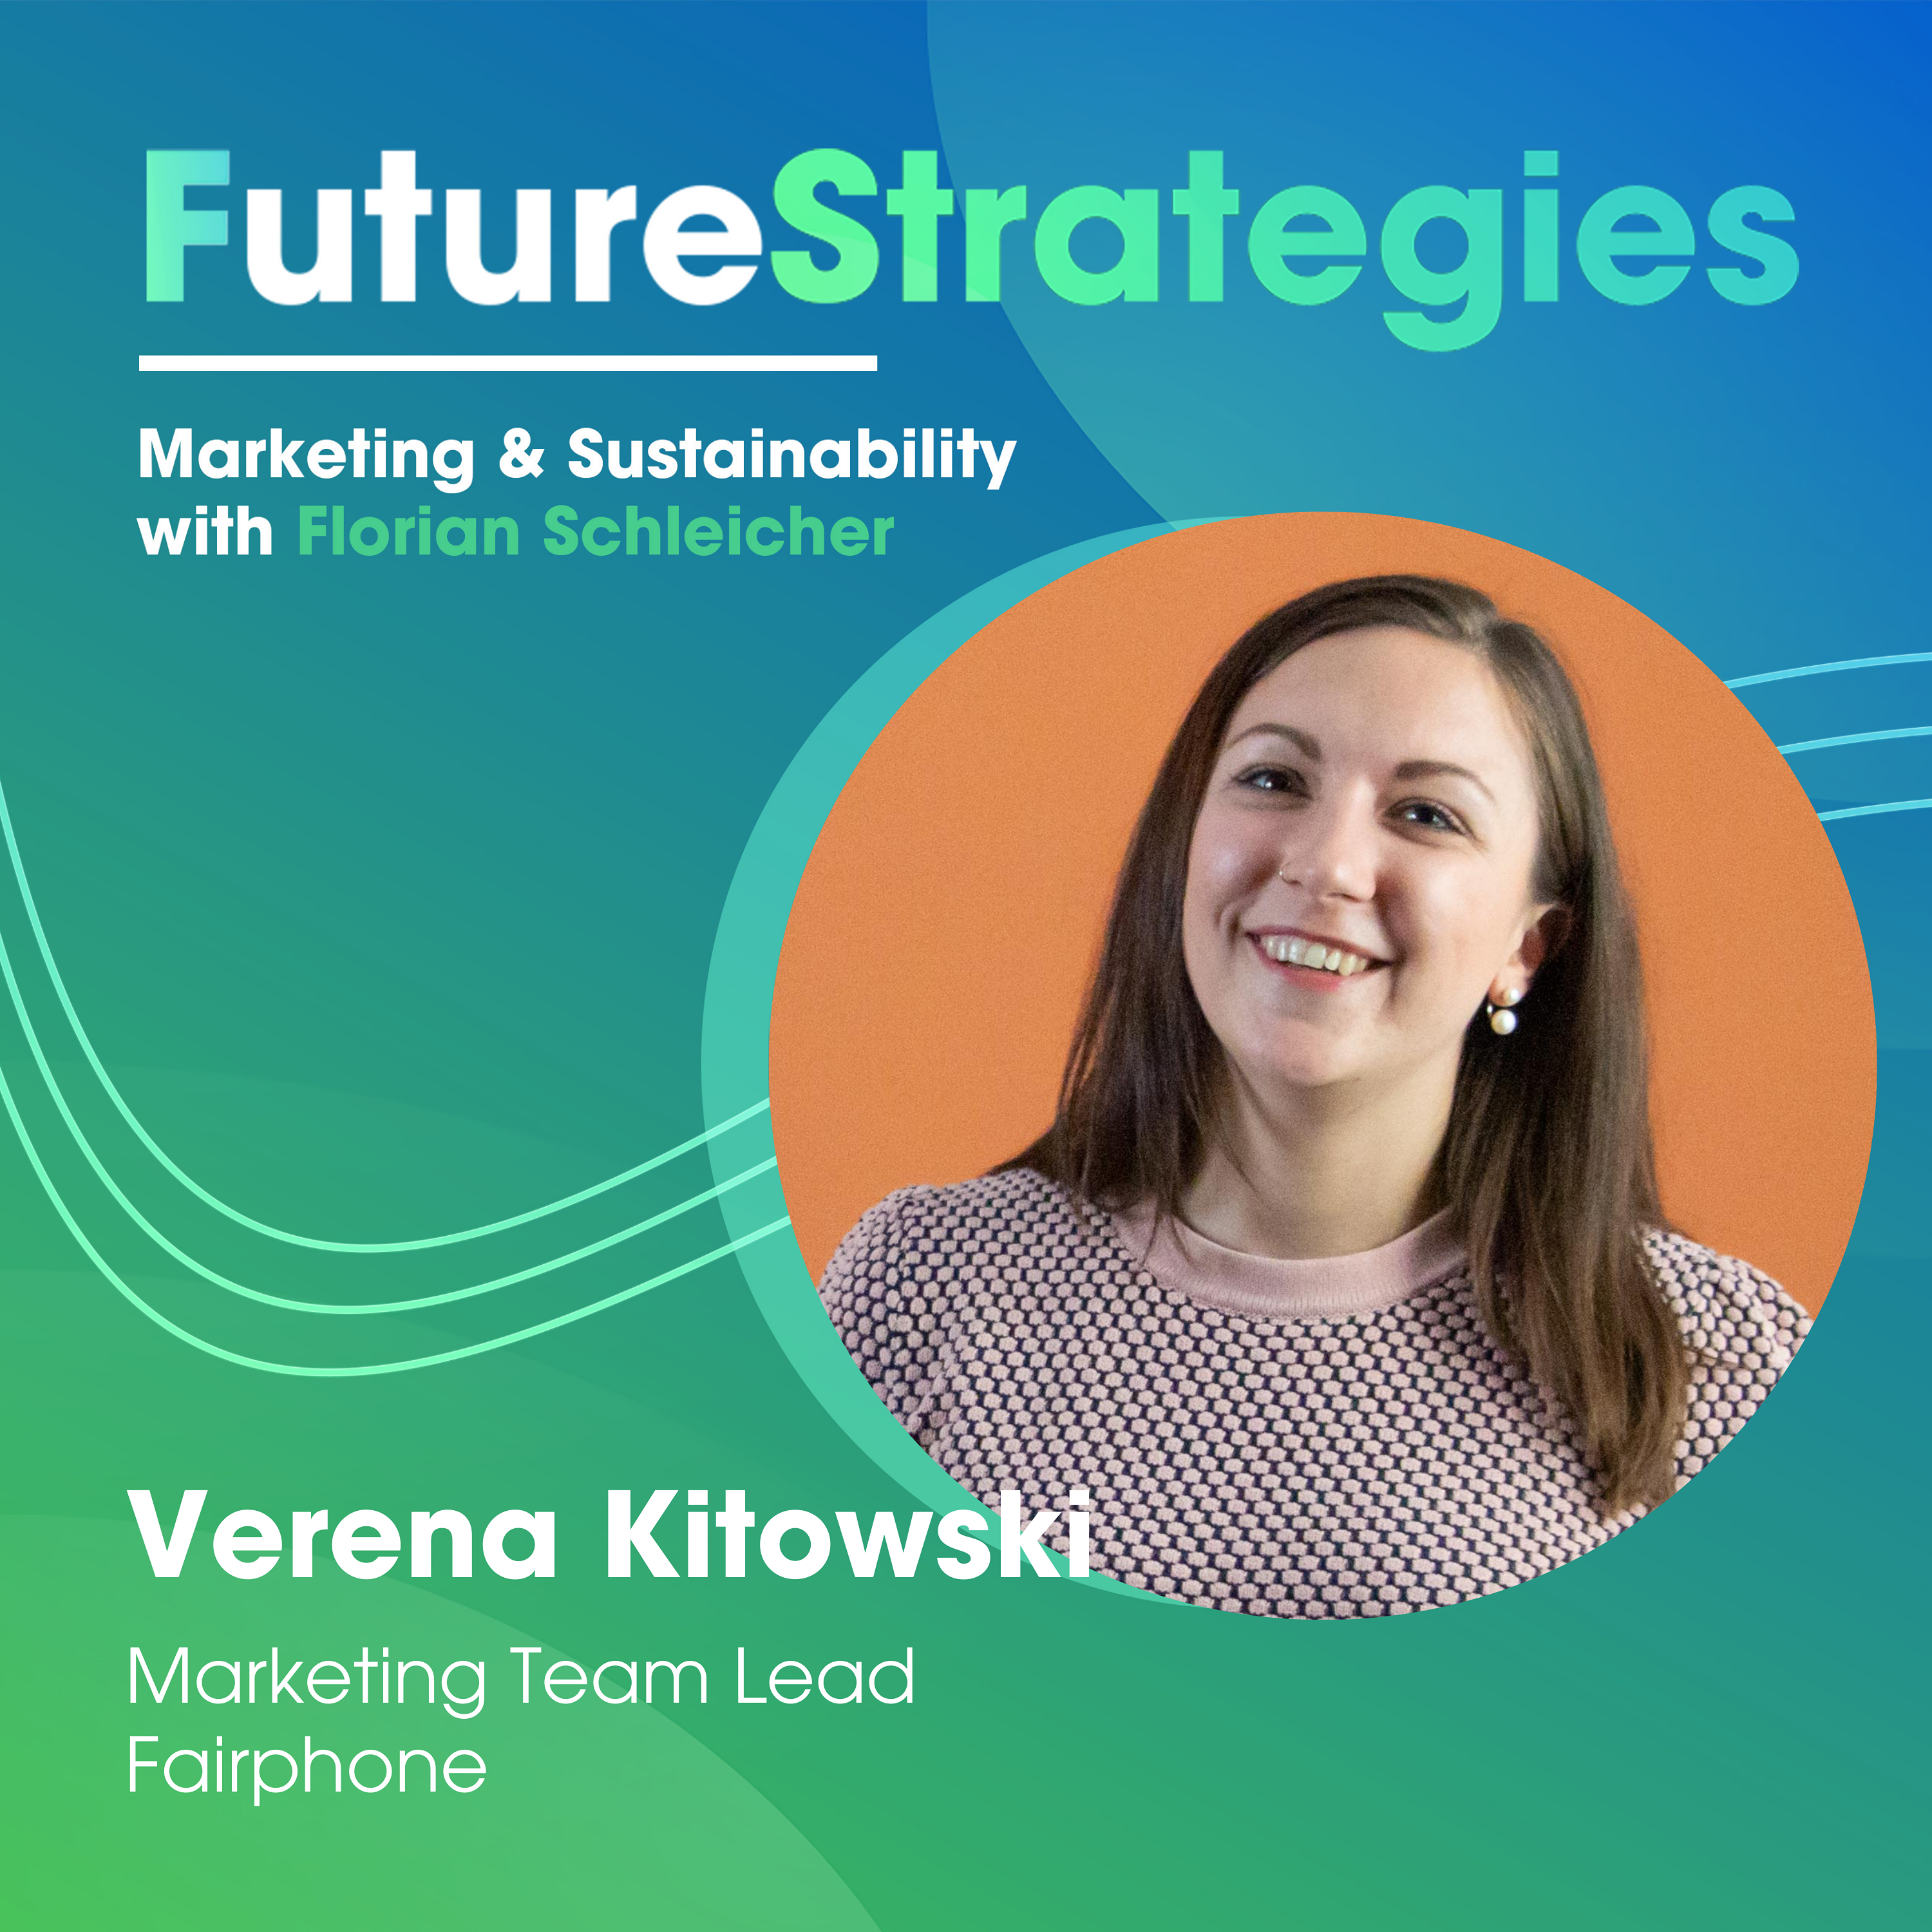 📱 ”The courageous choice” - Verena Kitowski from Fairphone on sustainability as a choice in marketing